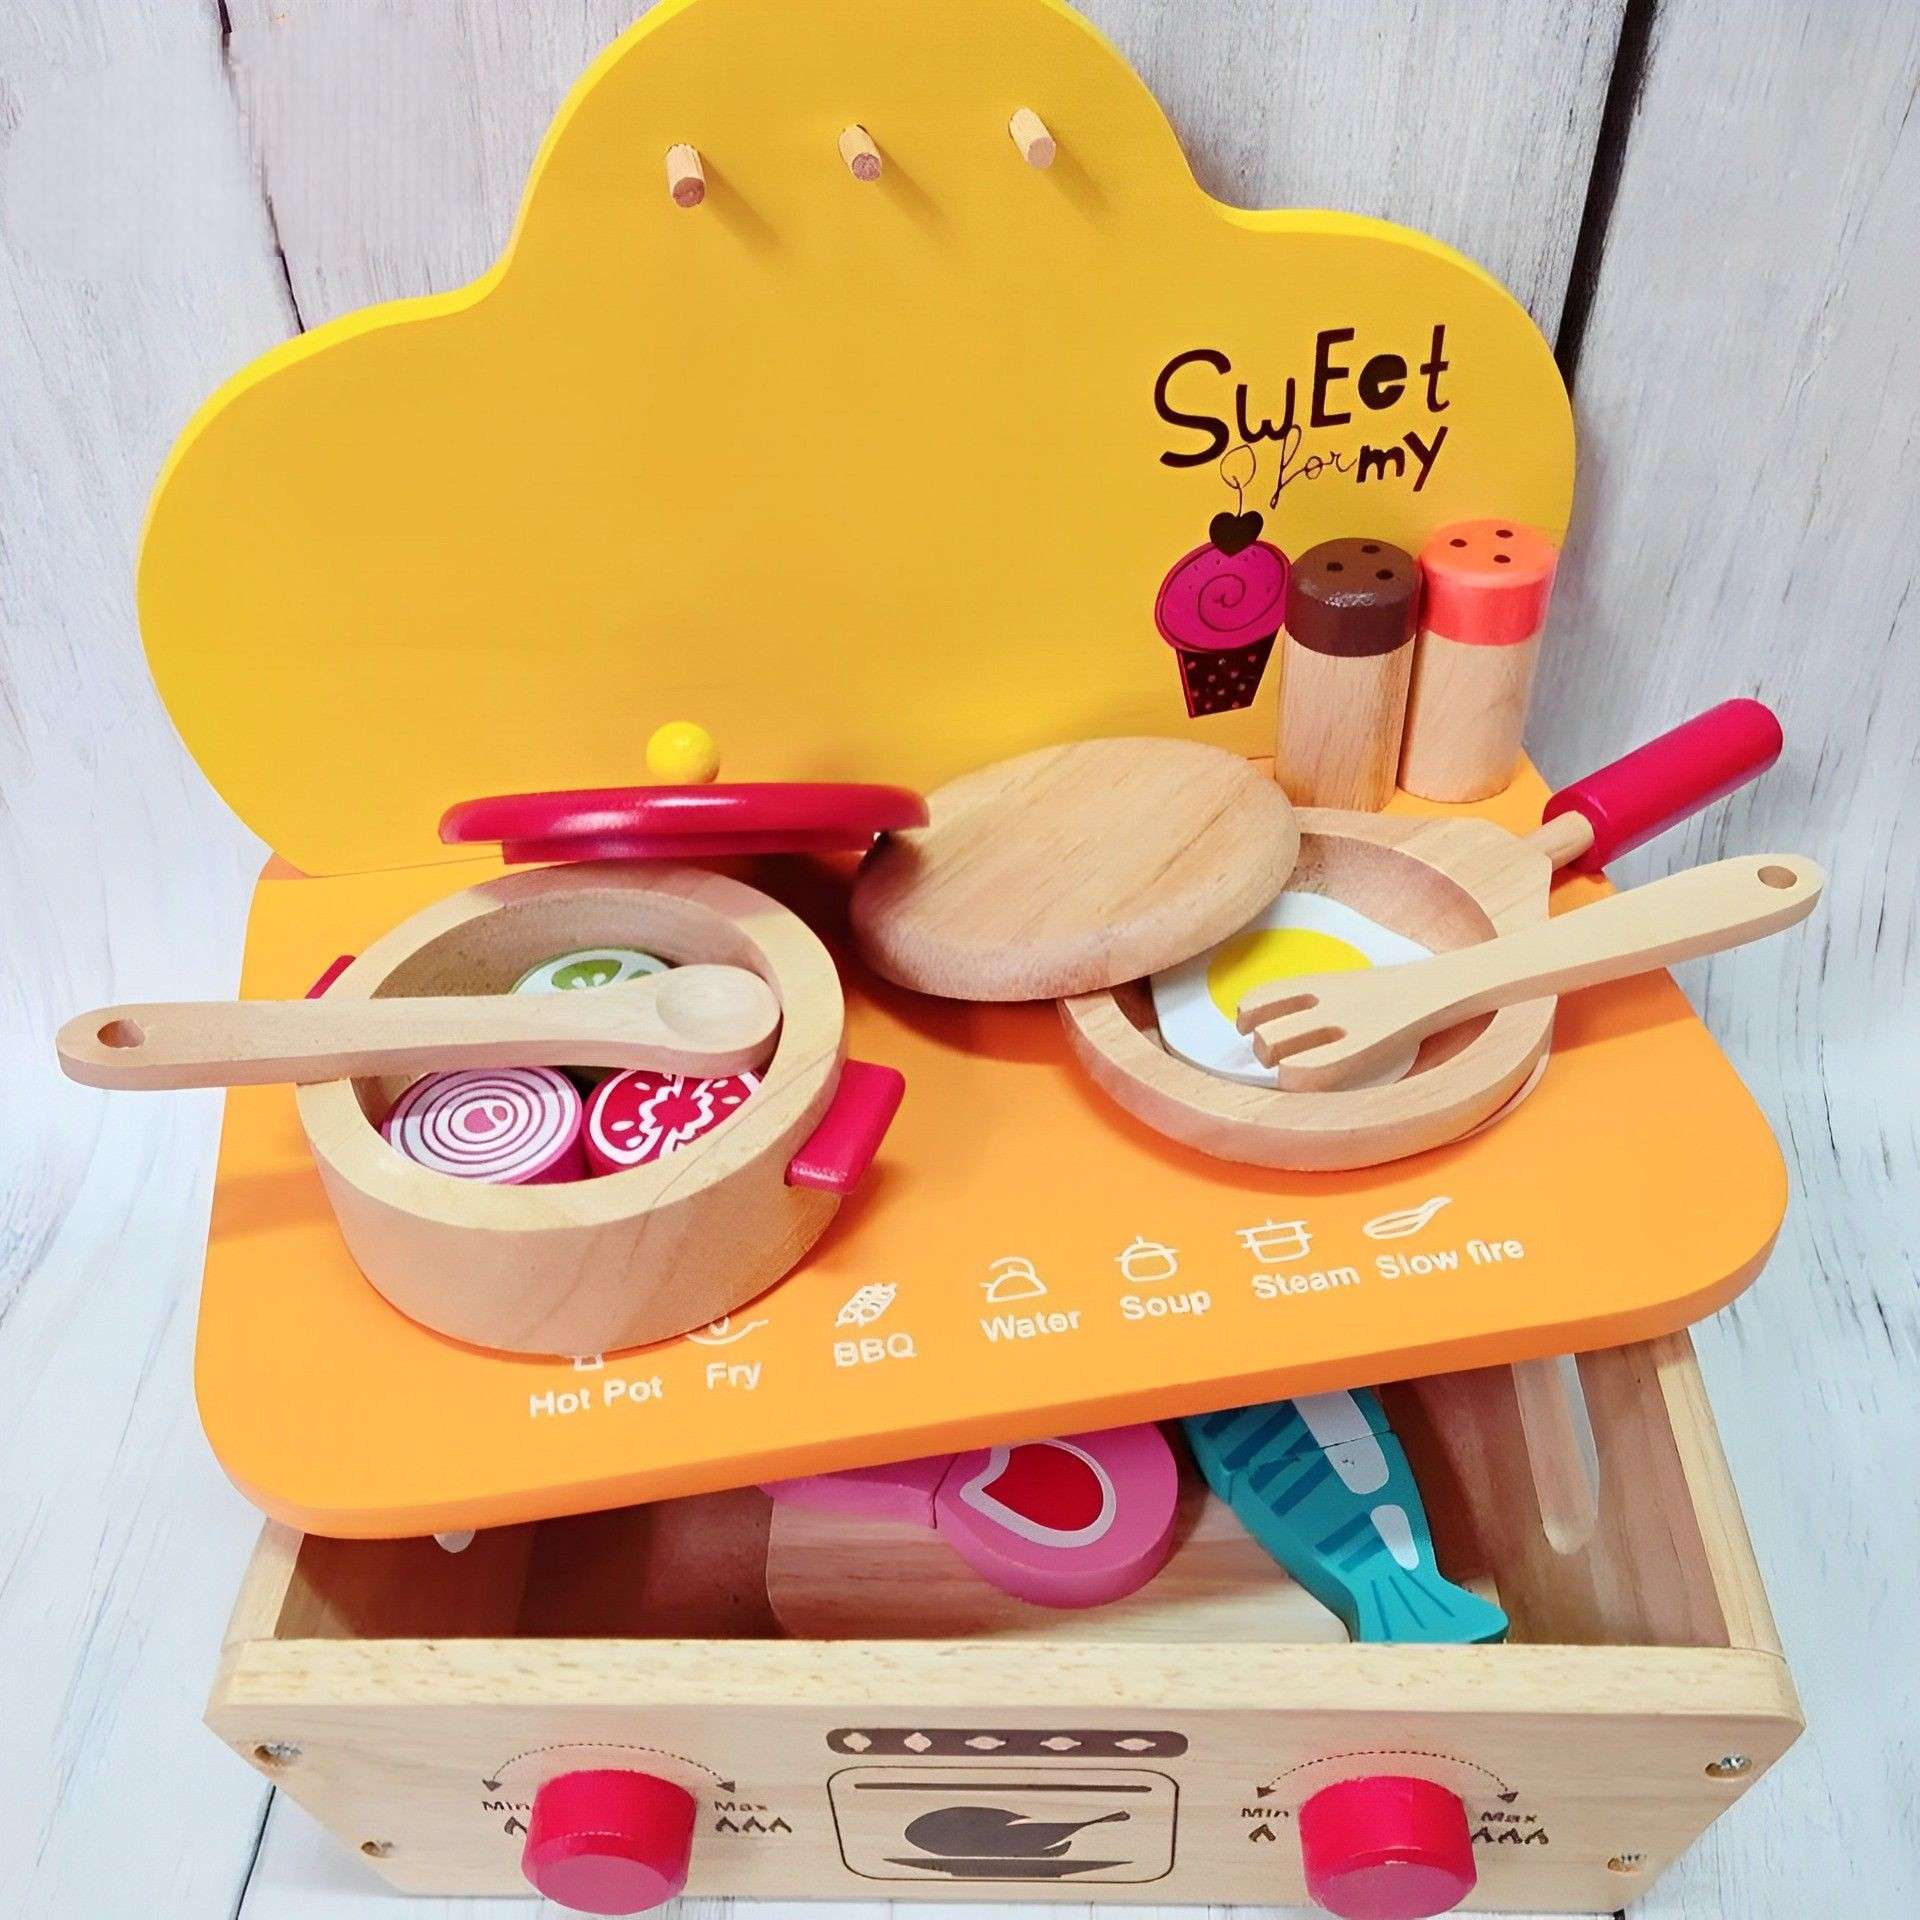 Wooden Play Kitchen Accessories Cooking Set Educational Toys For 3 Year Olds, Montessori Wooden Toys